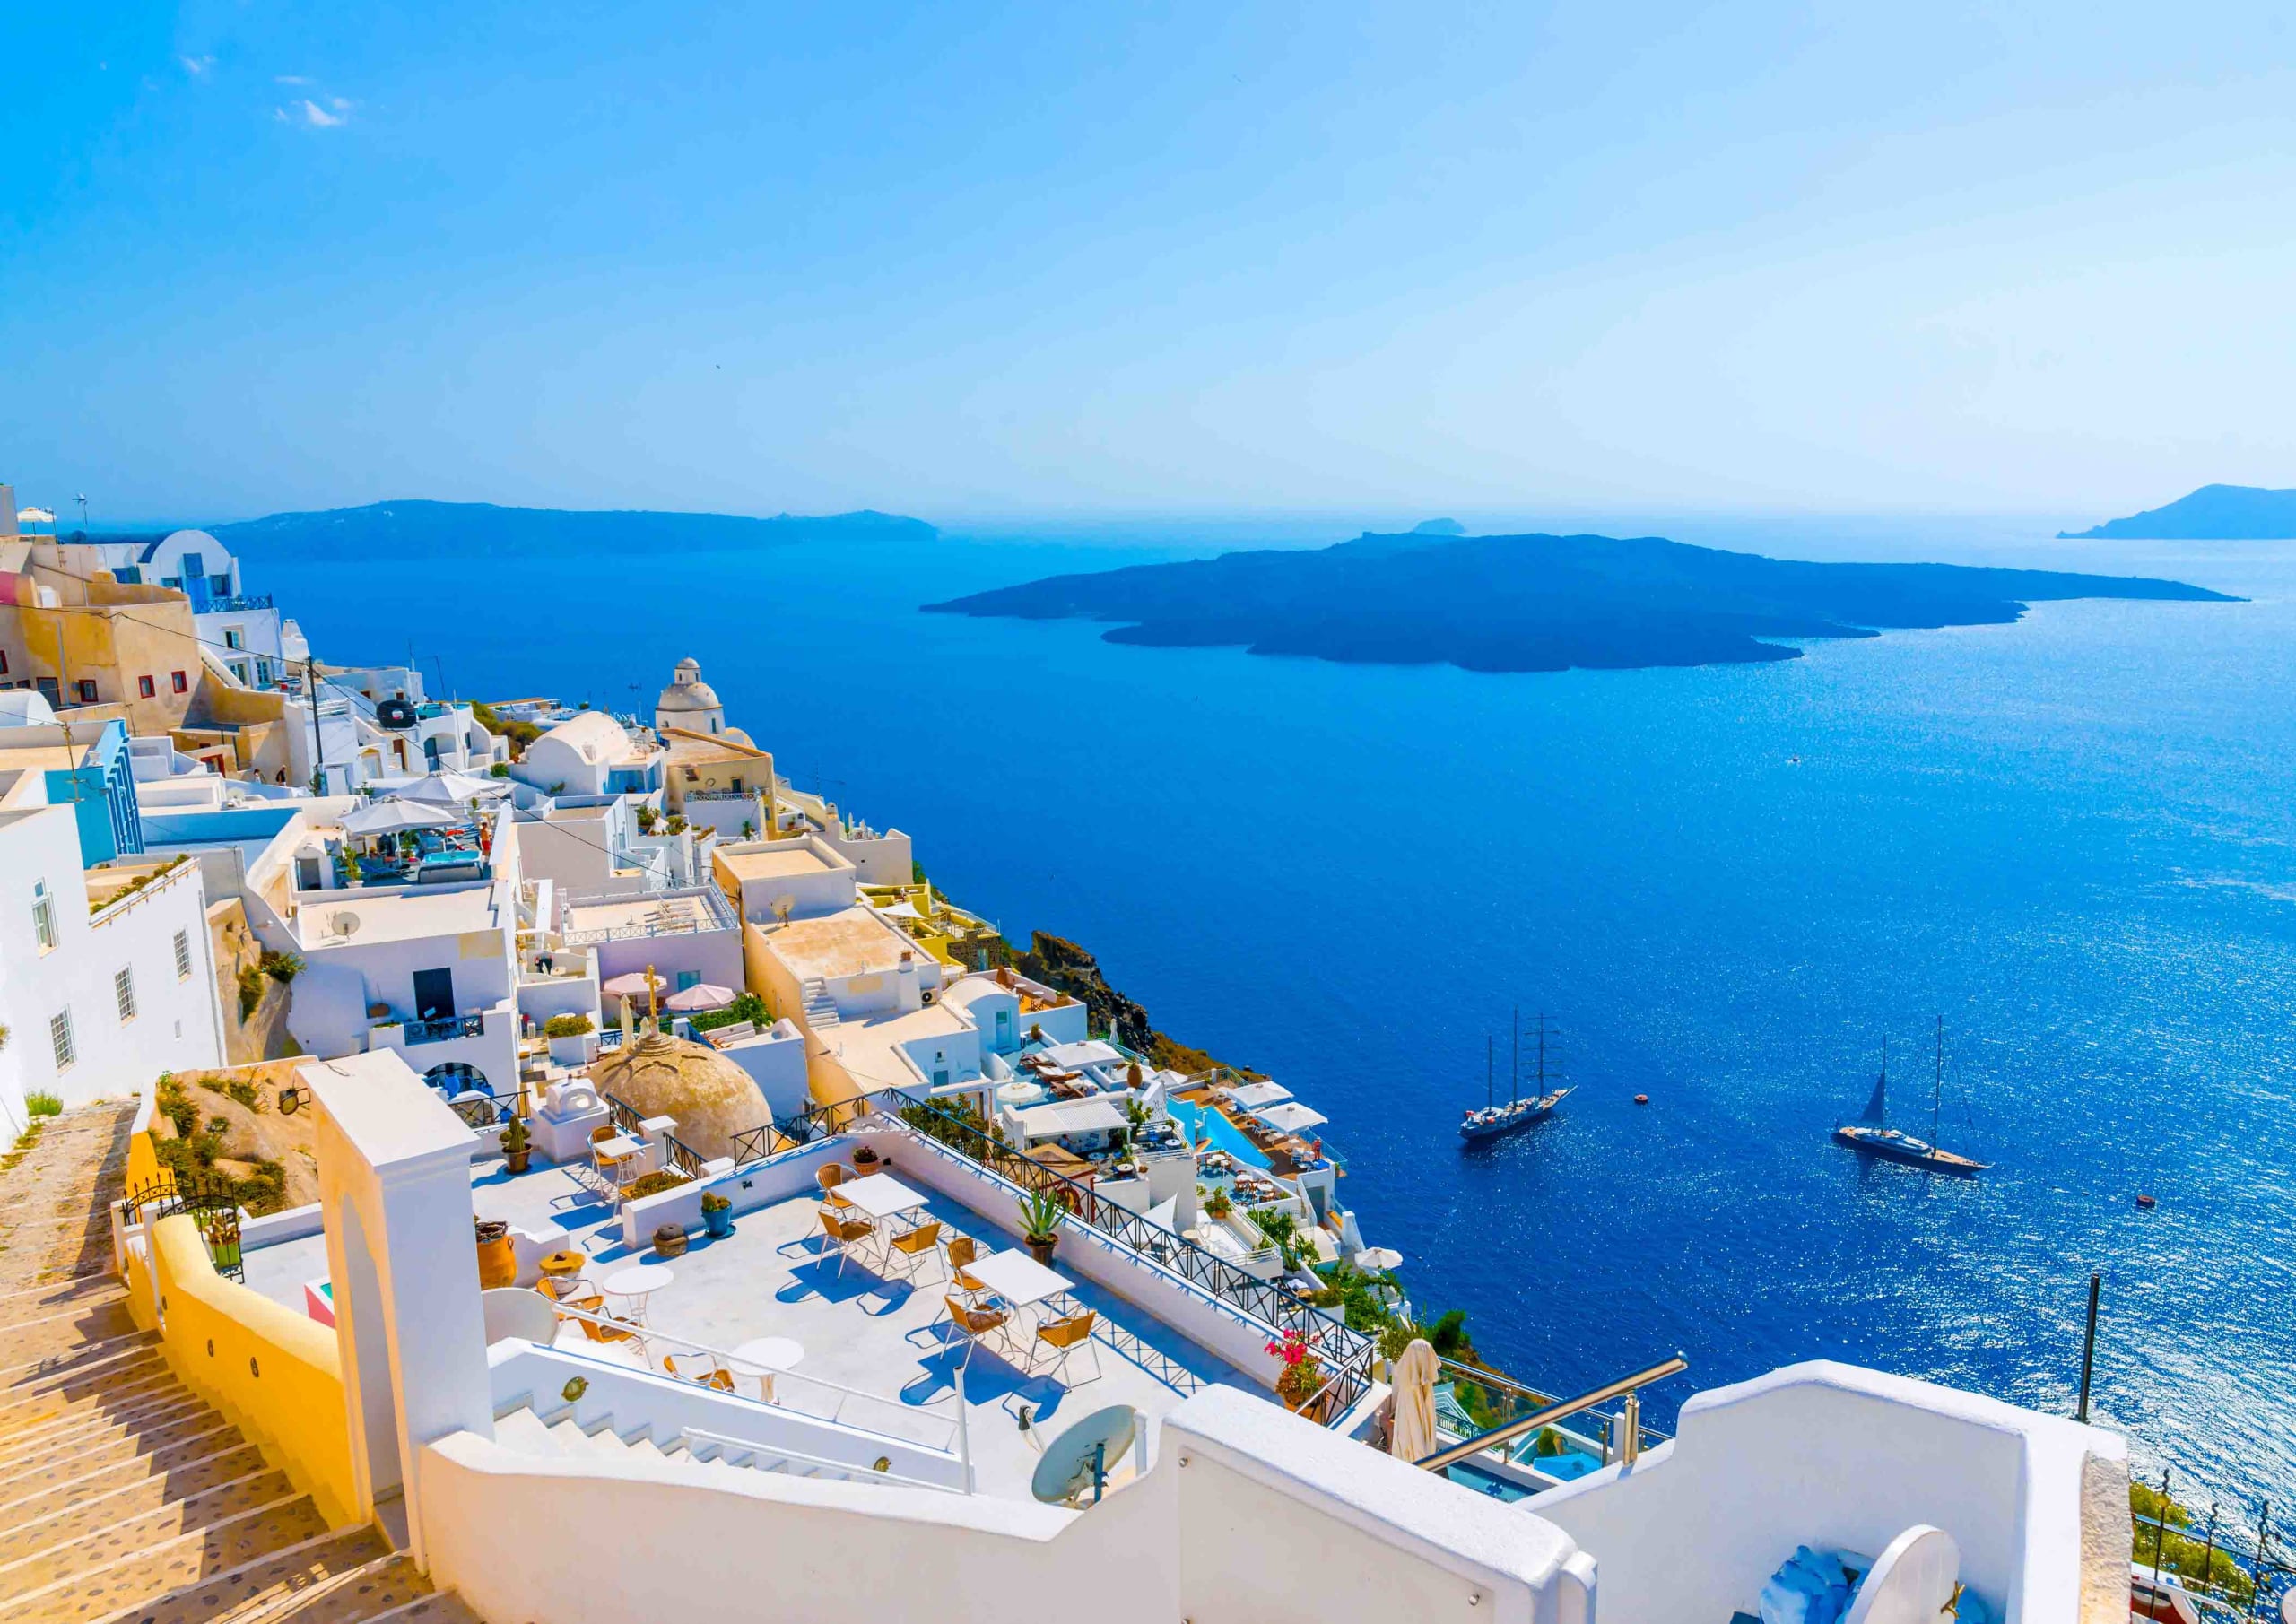 Holiday homes in Greece are still considered low-priced 